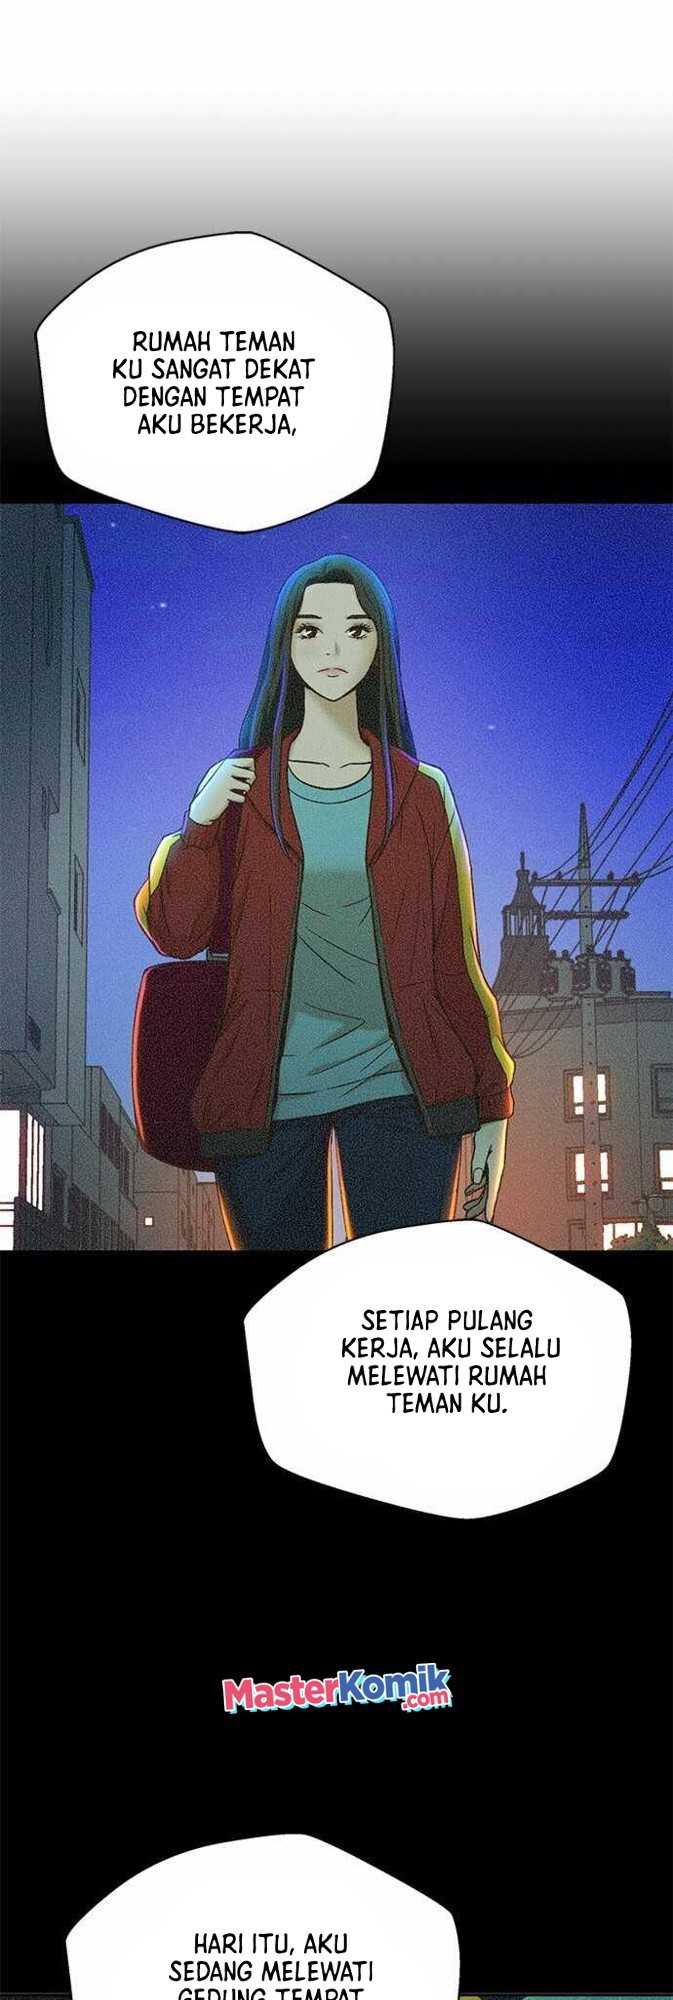 Judge Lee Han Young Chapter 27